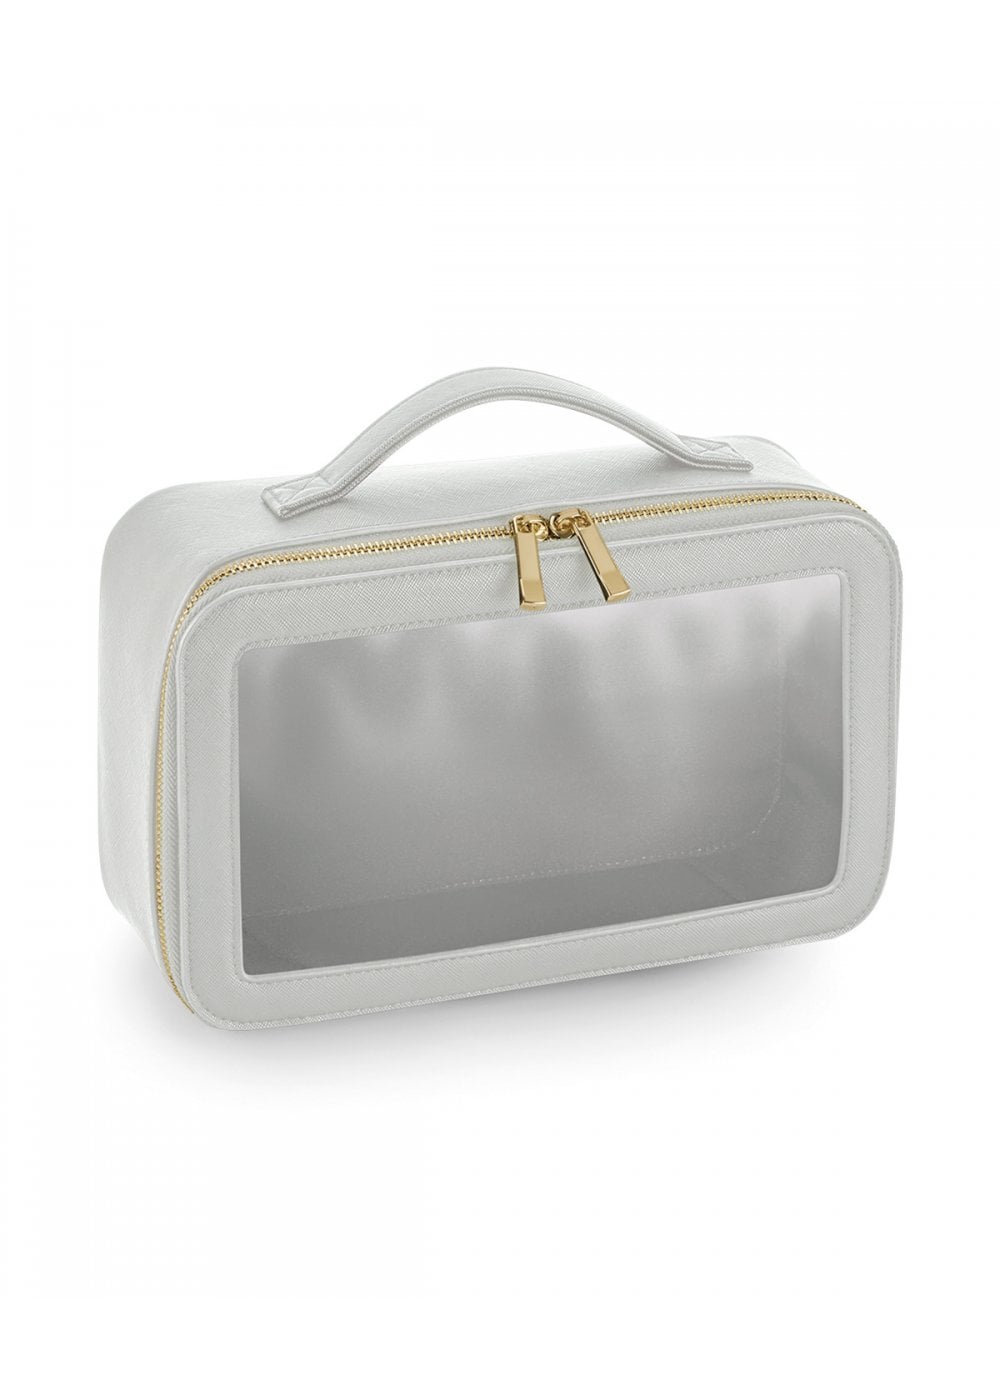 CLEAR TRAVEL COSMETIC BAG GREY